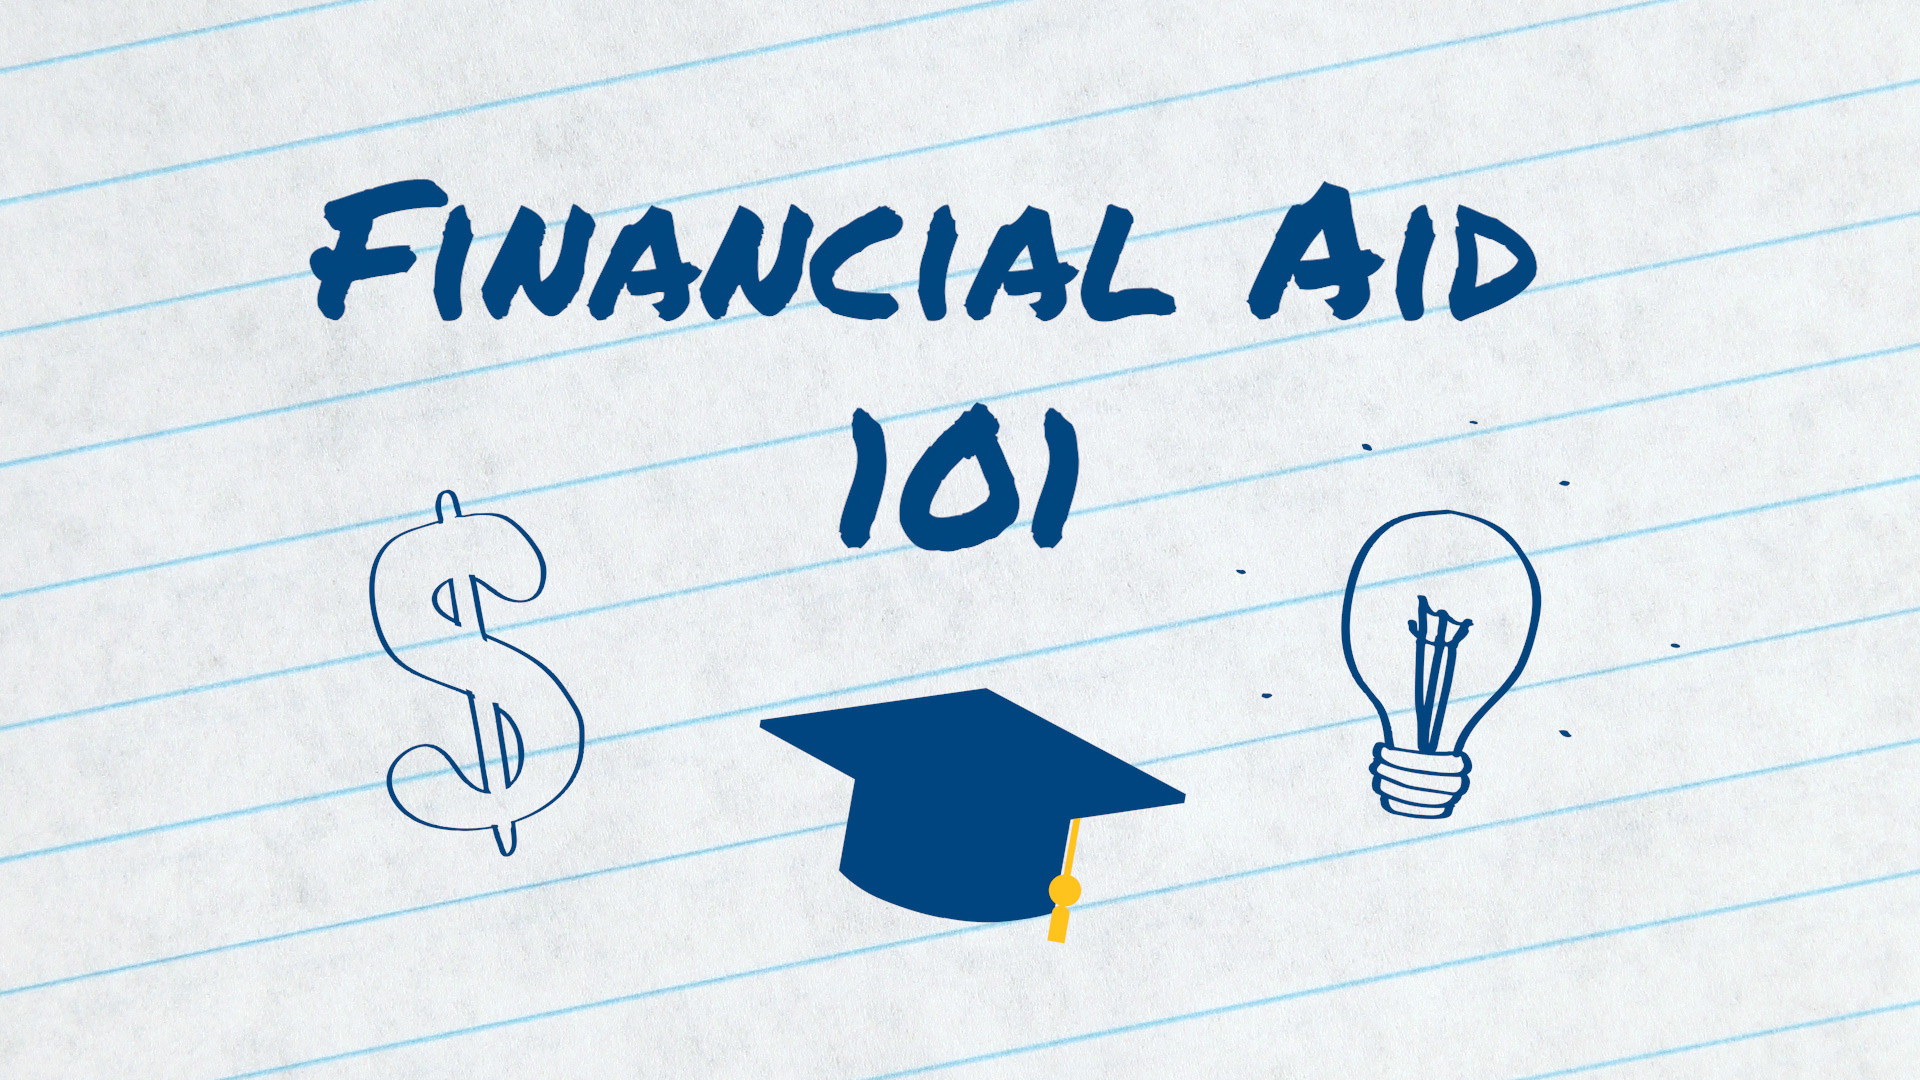 lined paper with "financial aid 101"